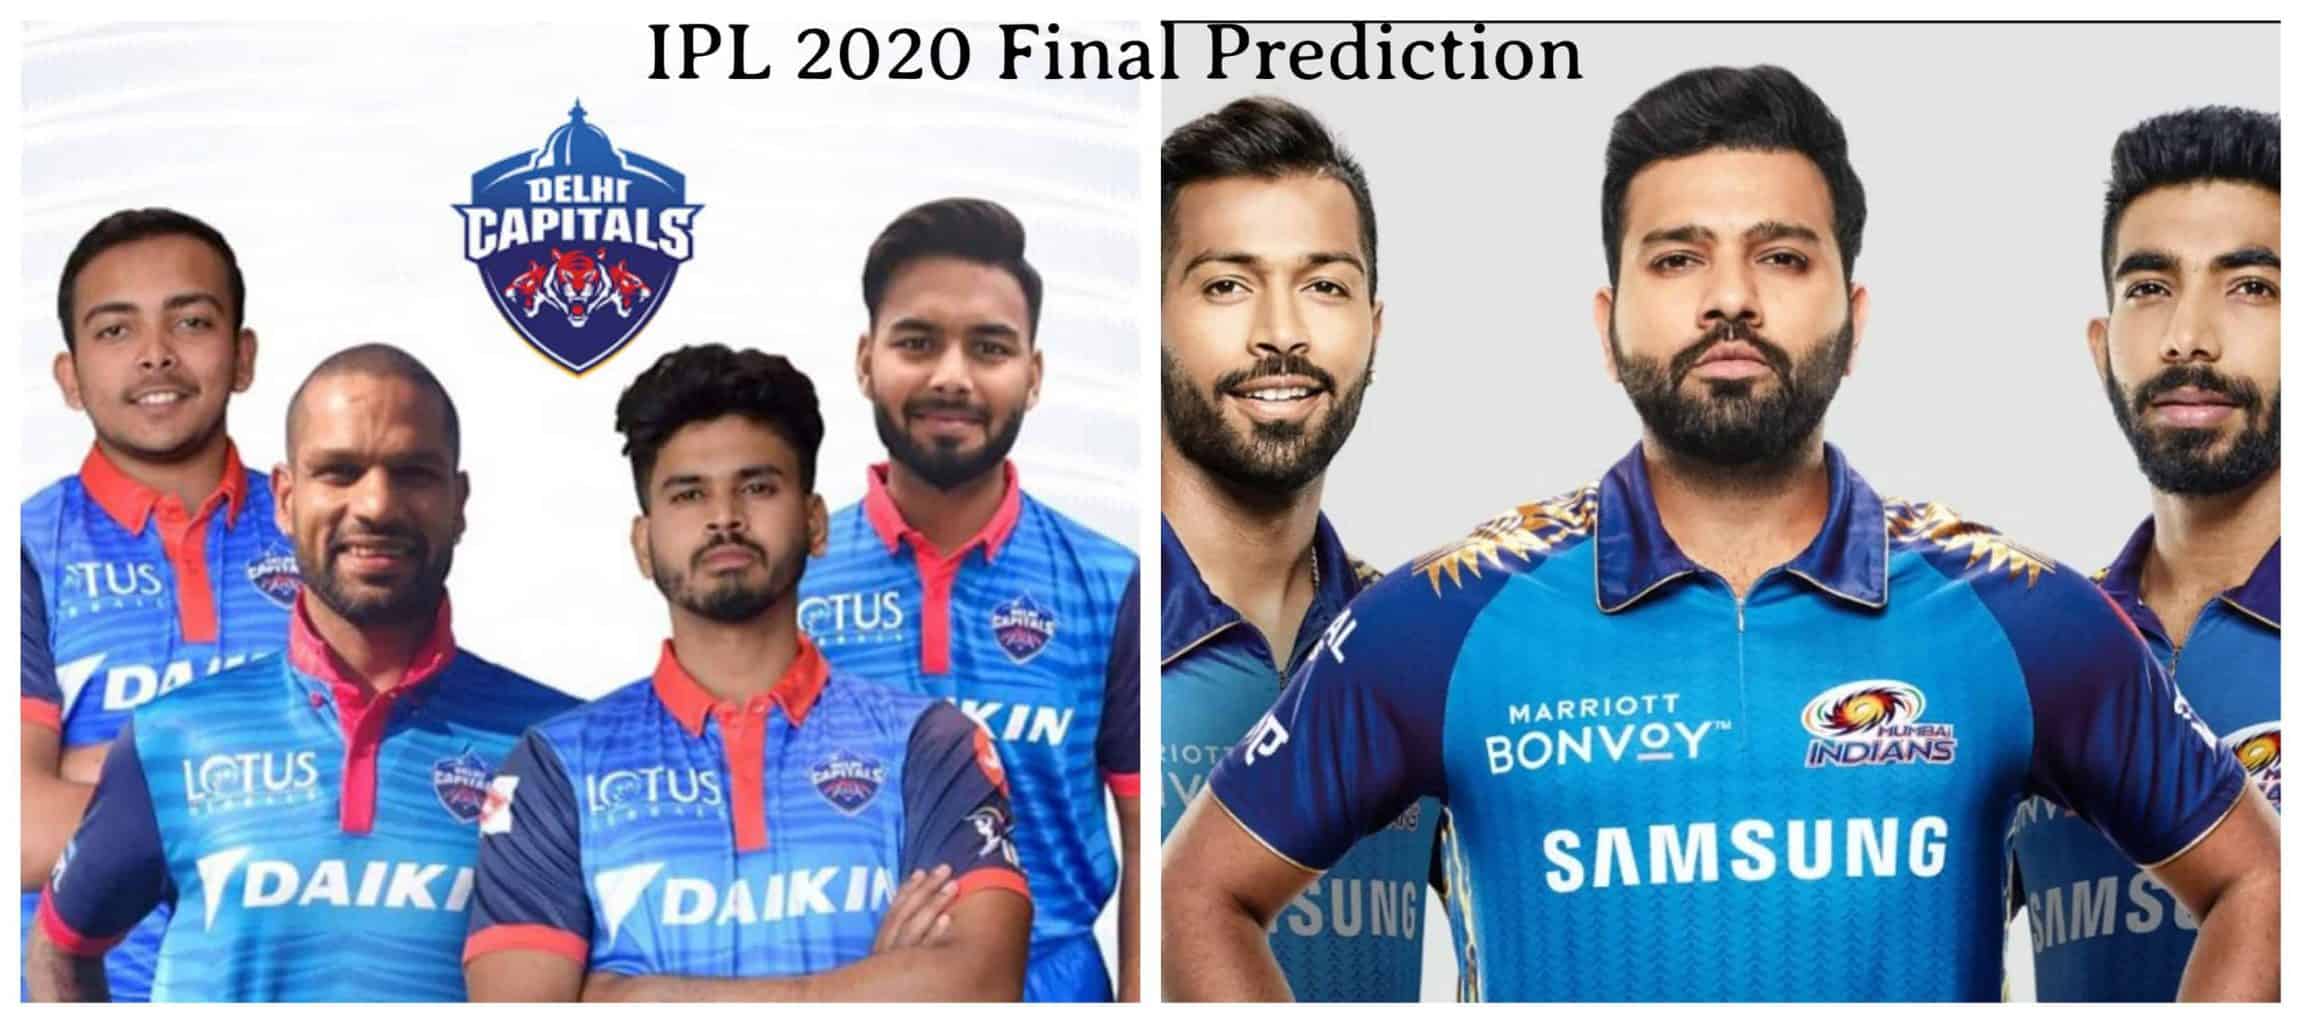 IPL 2020 Final Prediction: Why MI is better than DC in IPL 13 Final